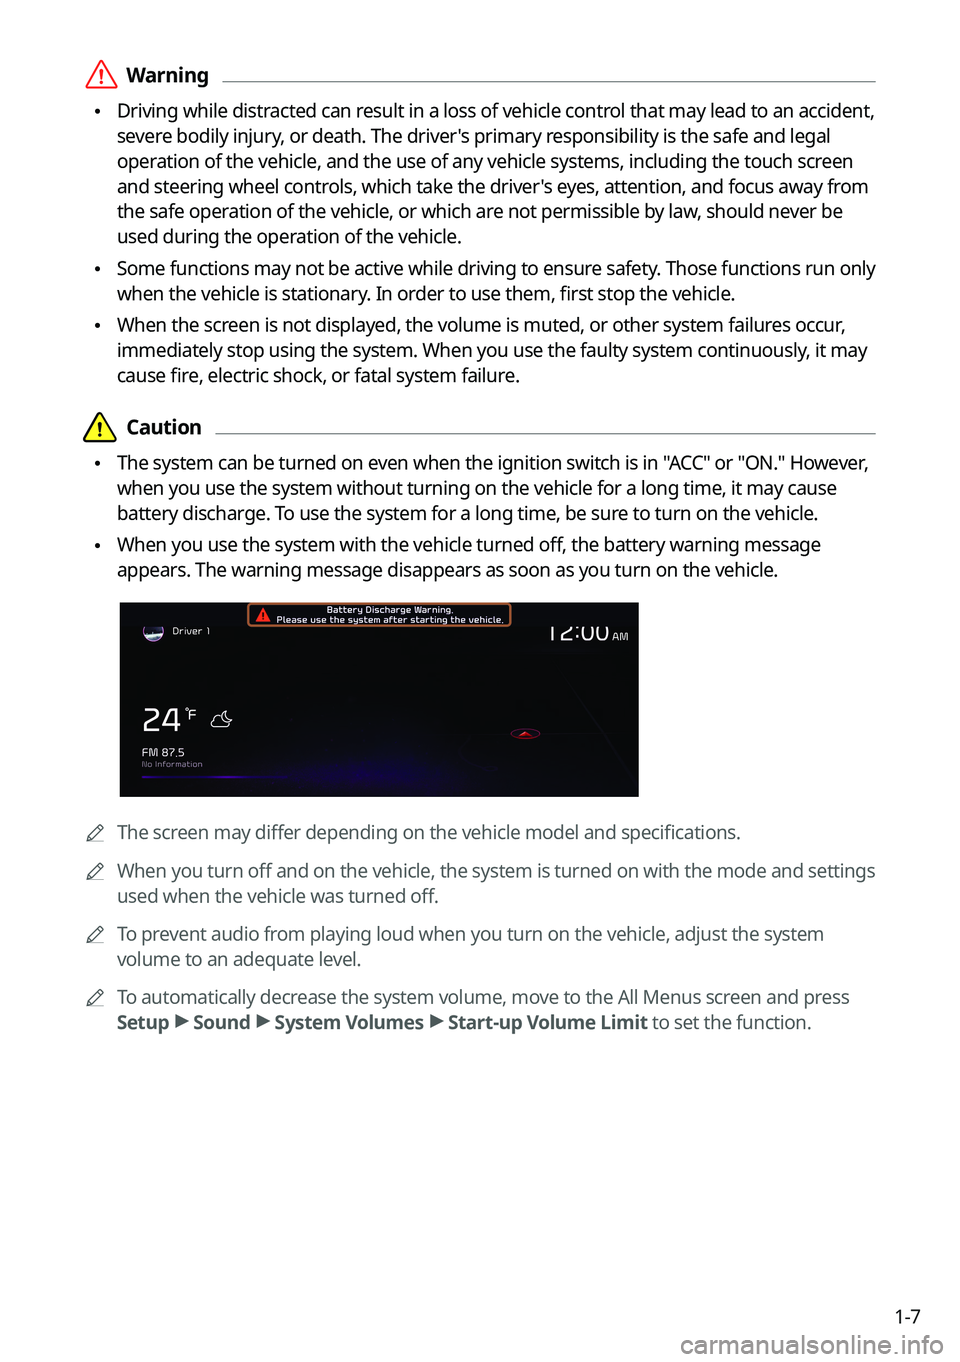 KIA SELTOS 2022  Navigation System Quick Reference Guide 1-7
 \335Warning
 \225Driving while distracted can result in a loss of vehicle control that may lead to an accident, 
severe bodily injury, or death. The driver's primary responsibility is the saf